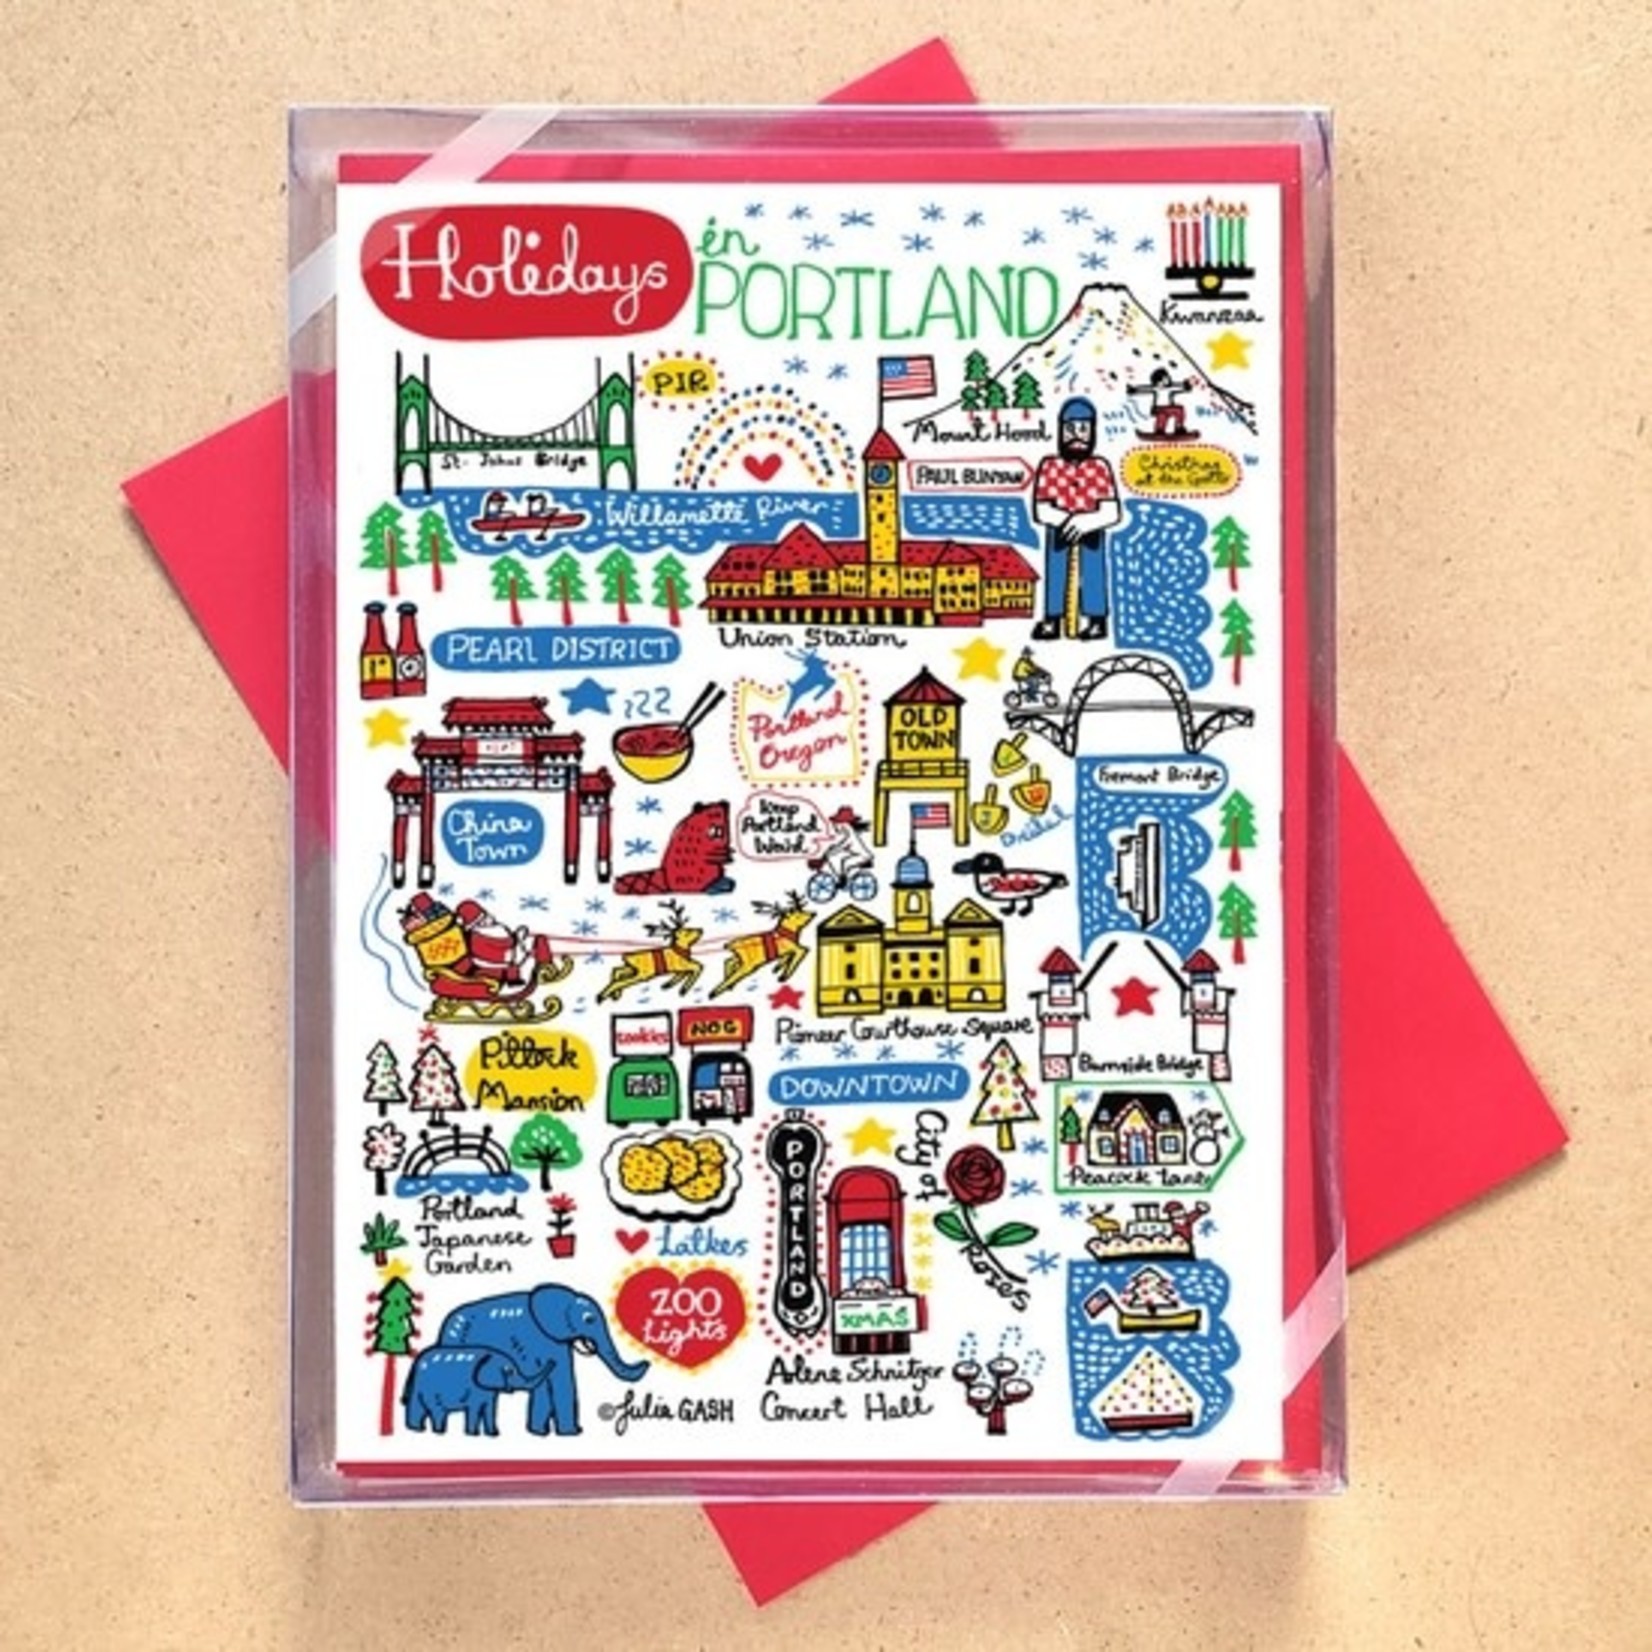 Greeting Cards - Christmas Holidays In Portland Boxed